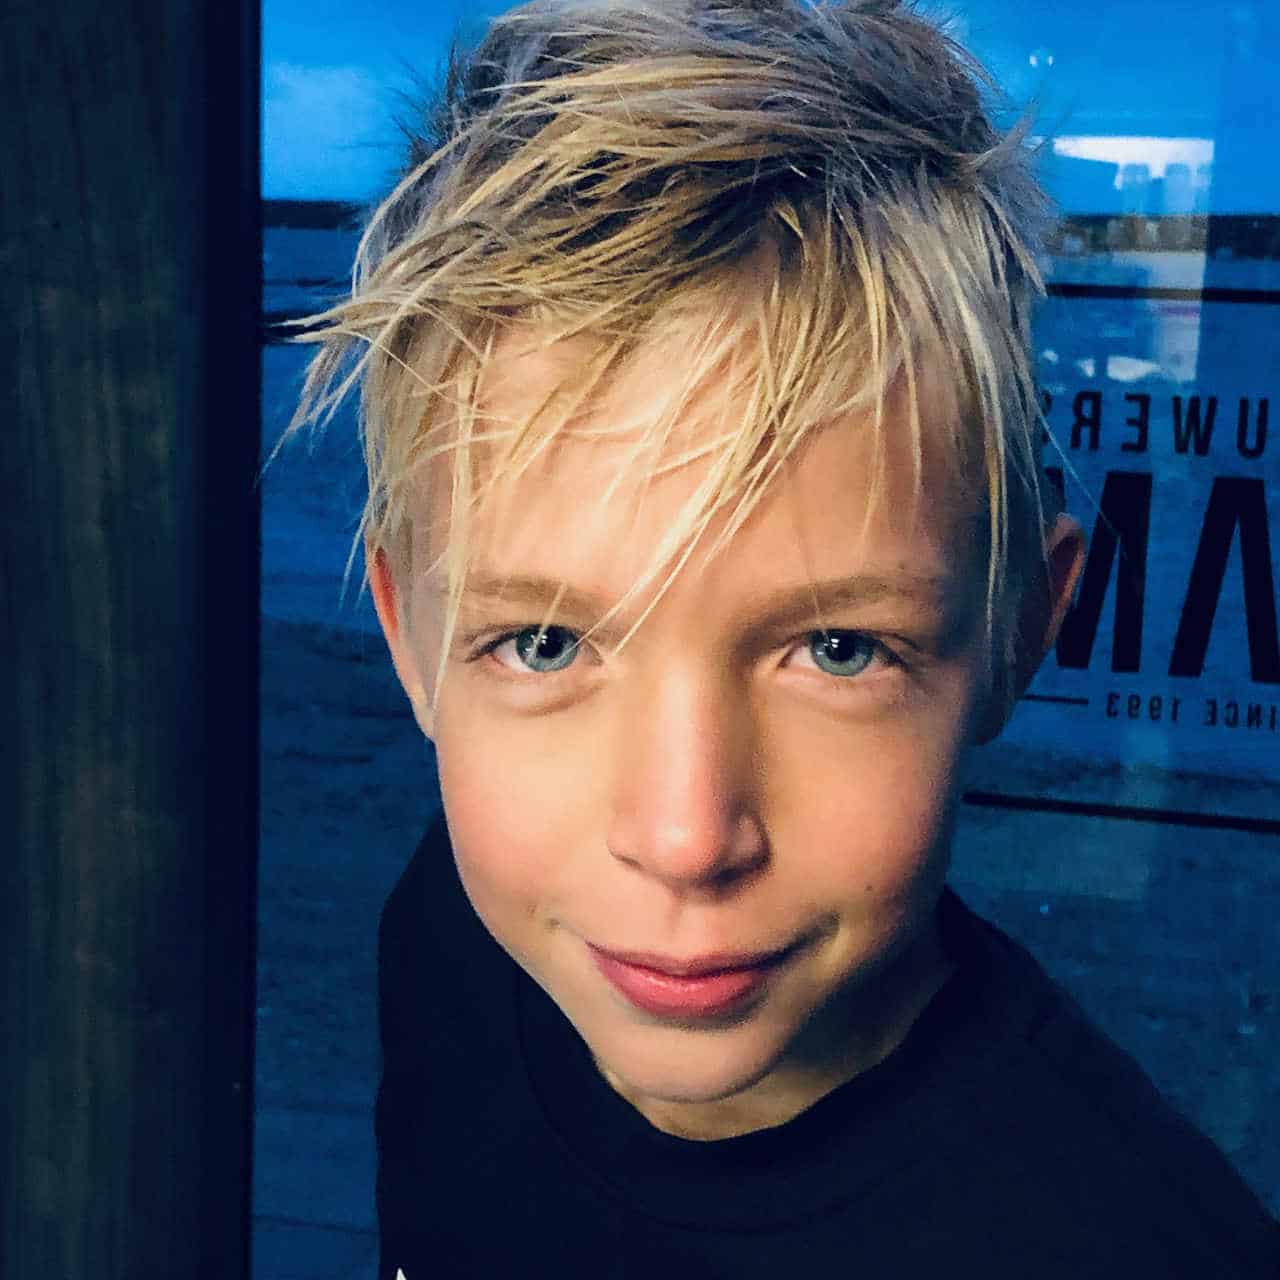 Interview With A 10-year-old Windsurfer - 2 - Windsurf